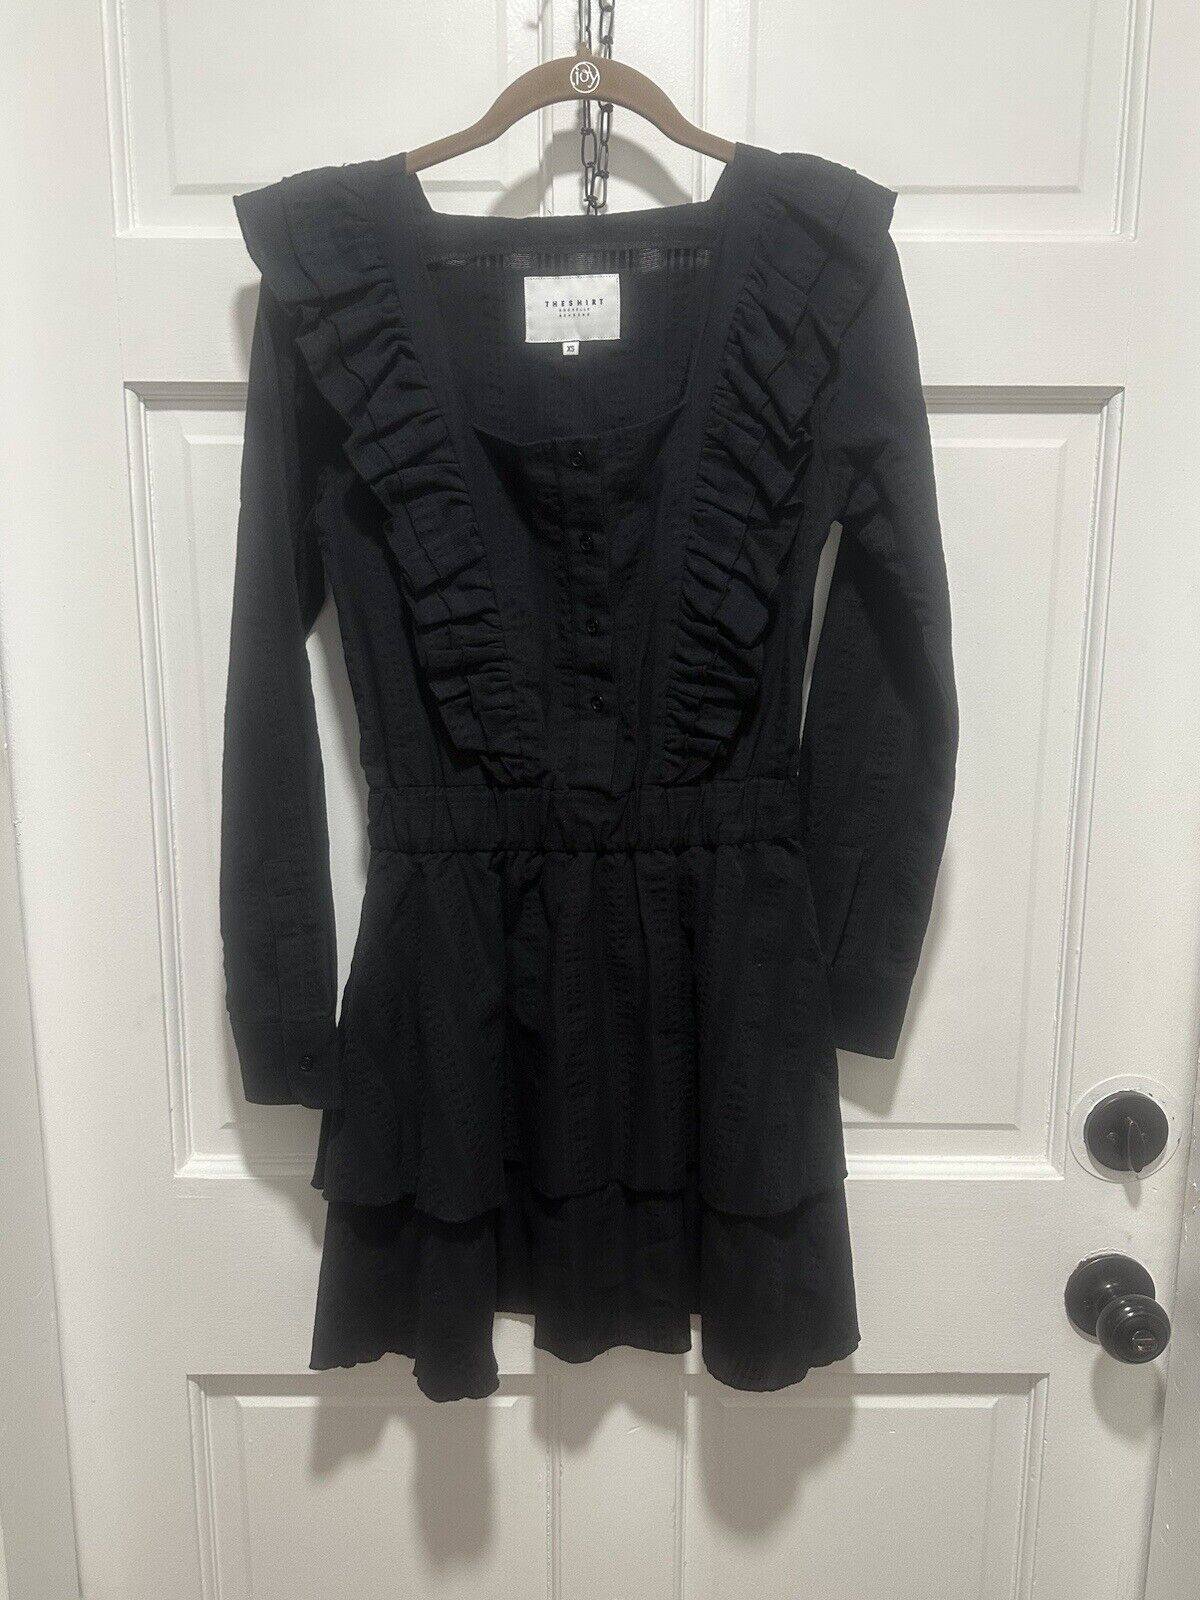 The Shirt Rochelle Behrens Black Tiered Cinched Waist Square Neck Dress Size XS